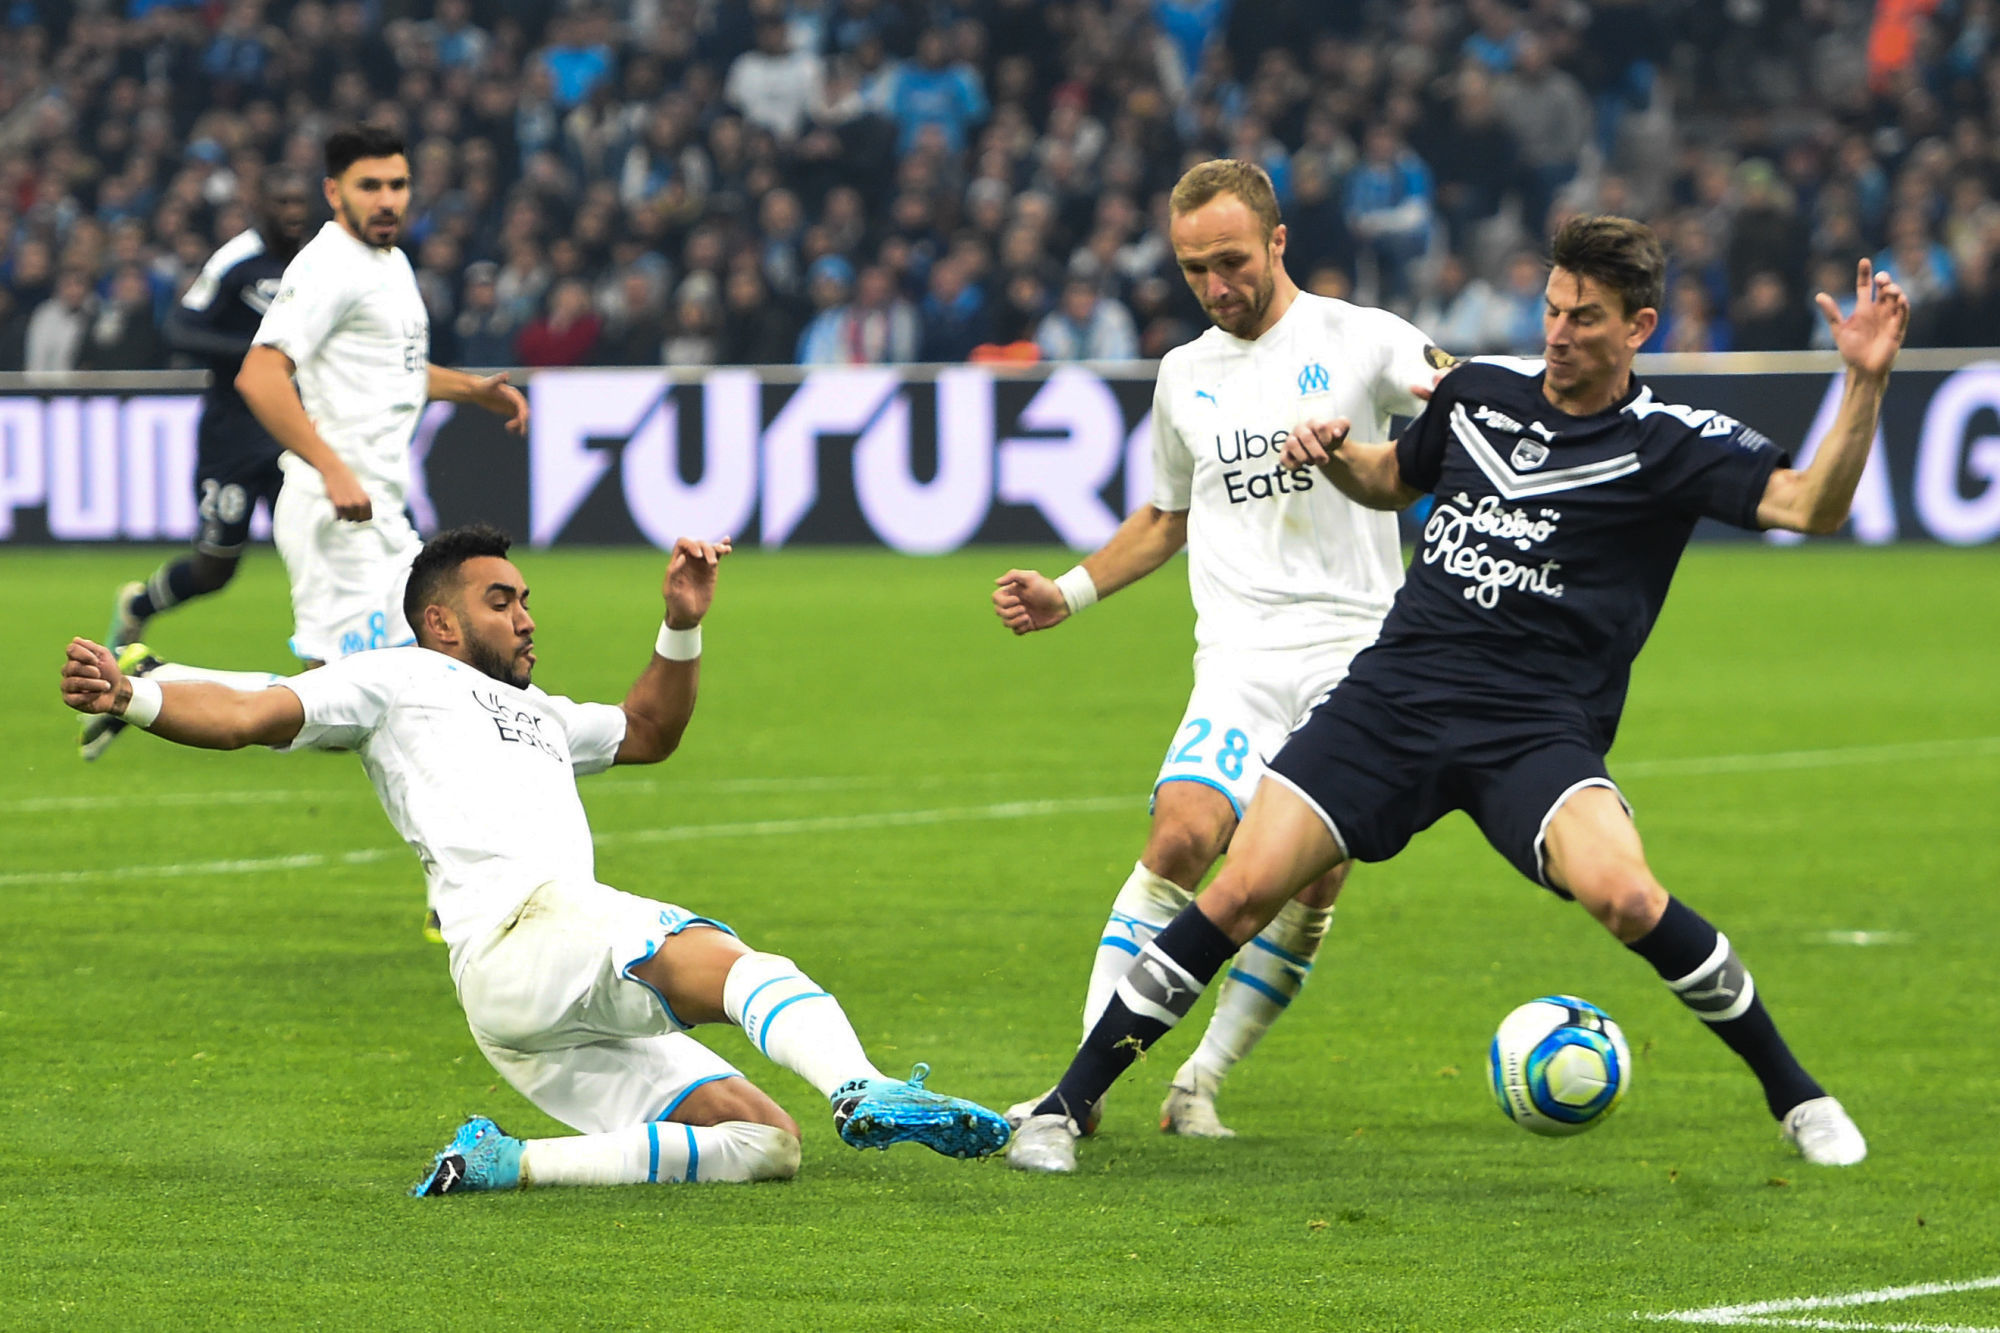 Dimitri Payet of Marseille and Valere Germain of Marseille and Laurent KOSCIELNY of Bordeaux  during the Ligue 1 match between Olympique Marseille and Girondins Bordeaux at Stade Velodrome on December 7, 2019 in Marseille, France. (Photo by Alexandre Dimou/Icon Sport) - Orange Vélodrome - Marseille (France)